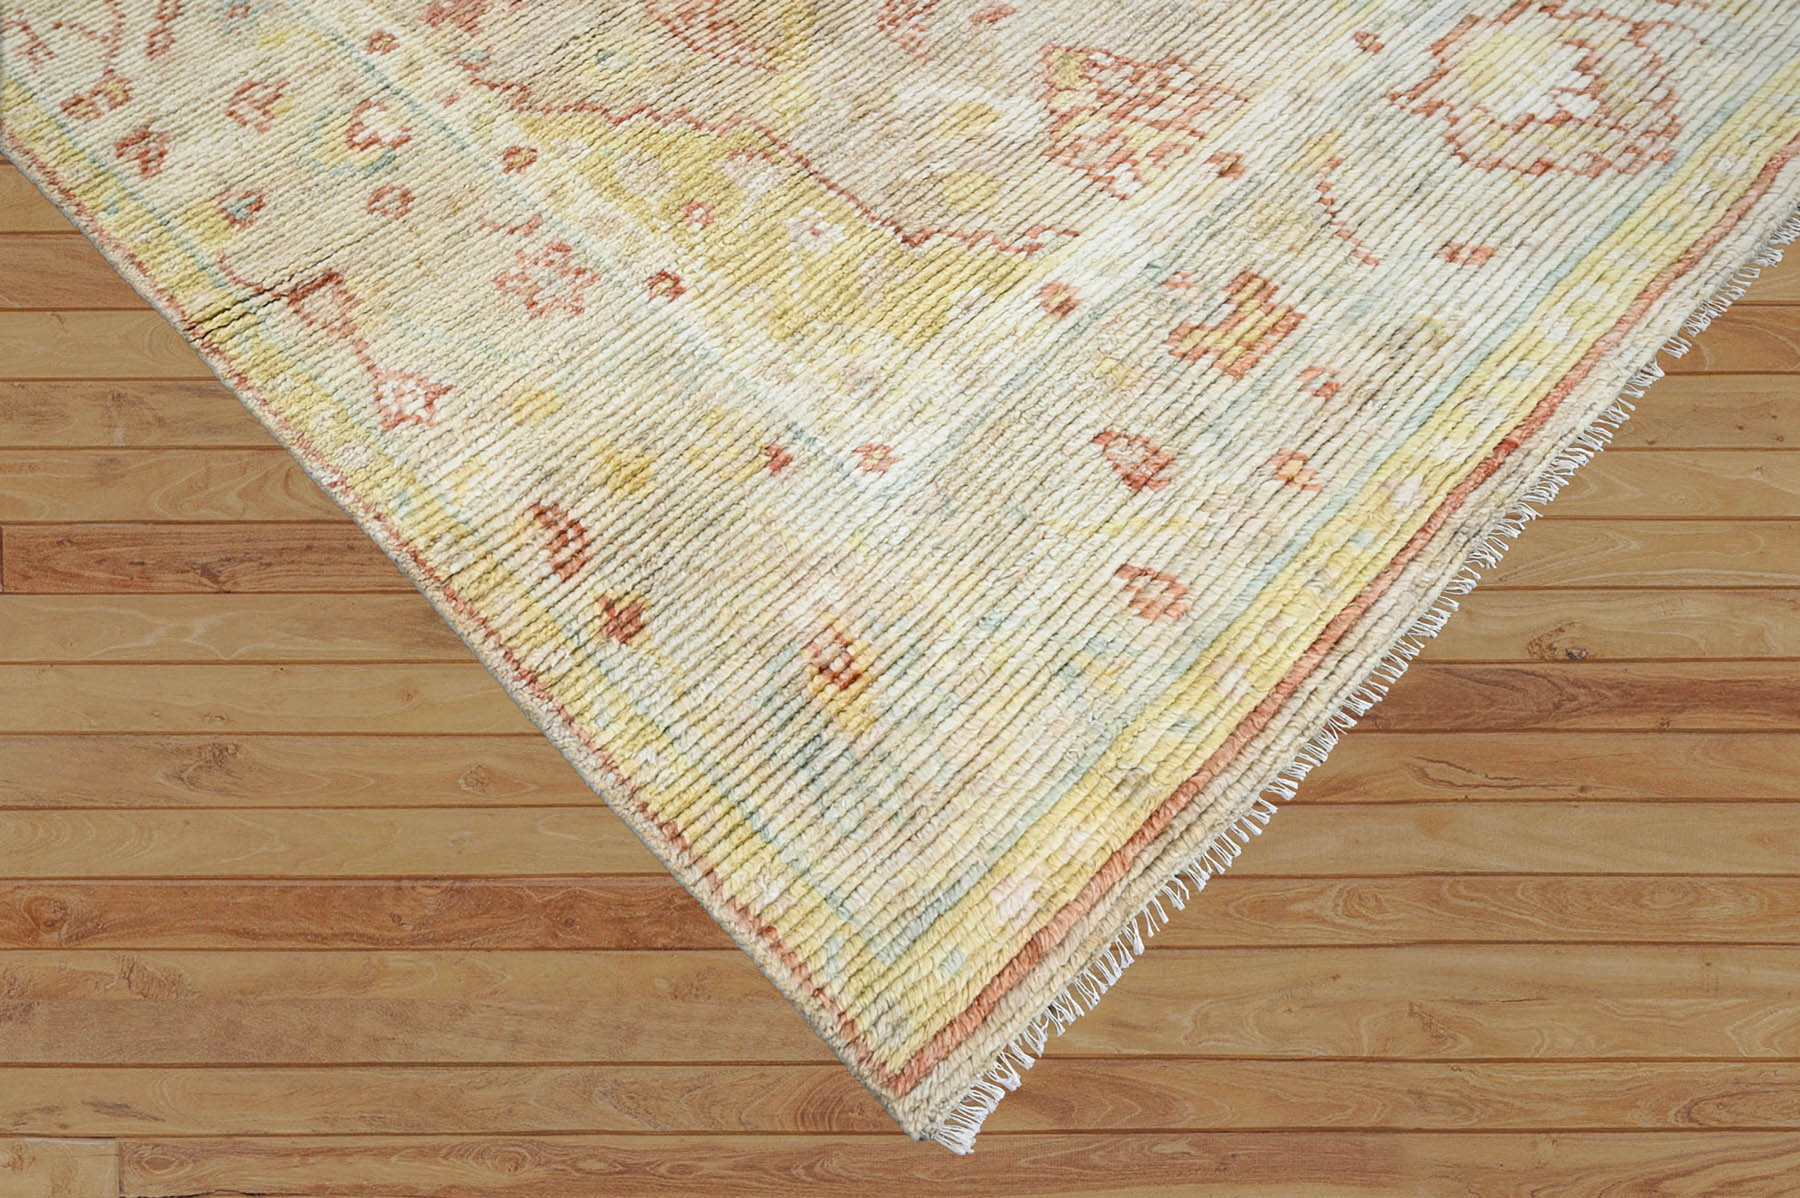 Leming 9x12 Tan, Beige Hand Knotted Afghan Oushak 100% Wool Oushak Traditional Oriental Area Rug